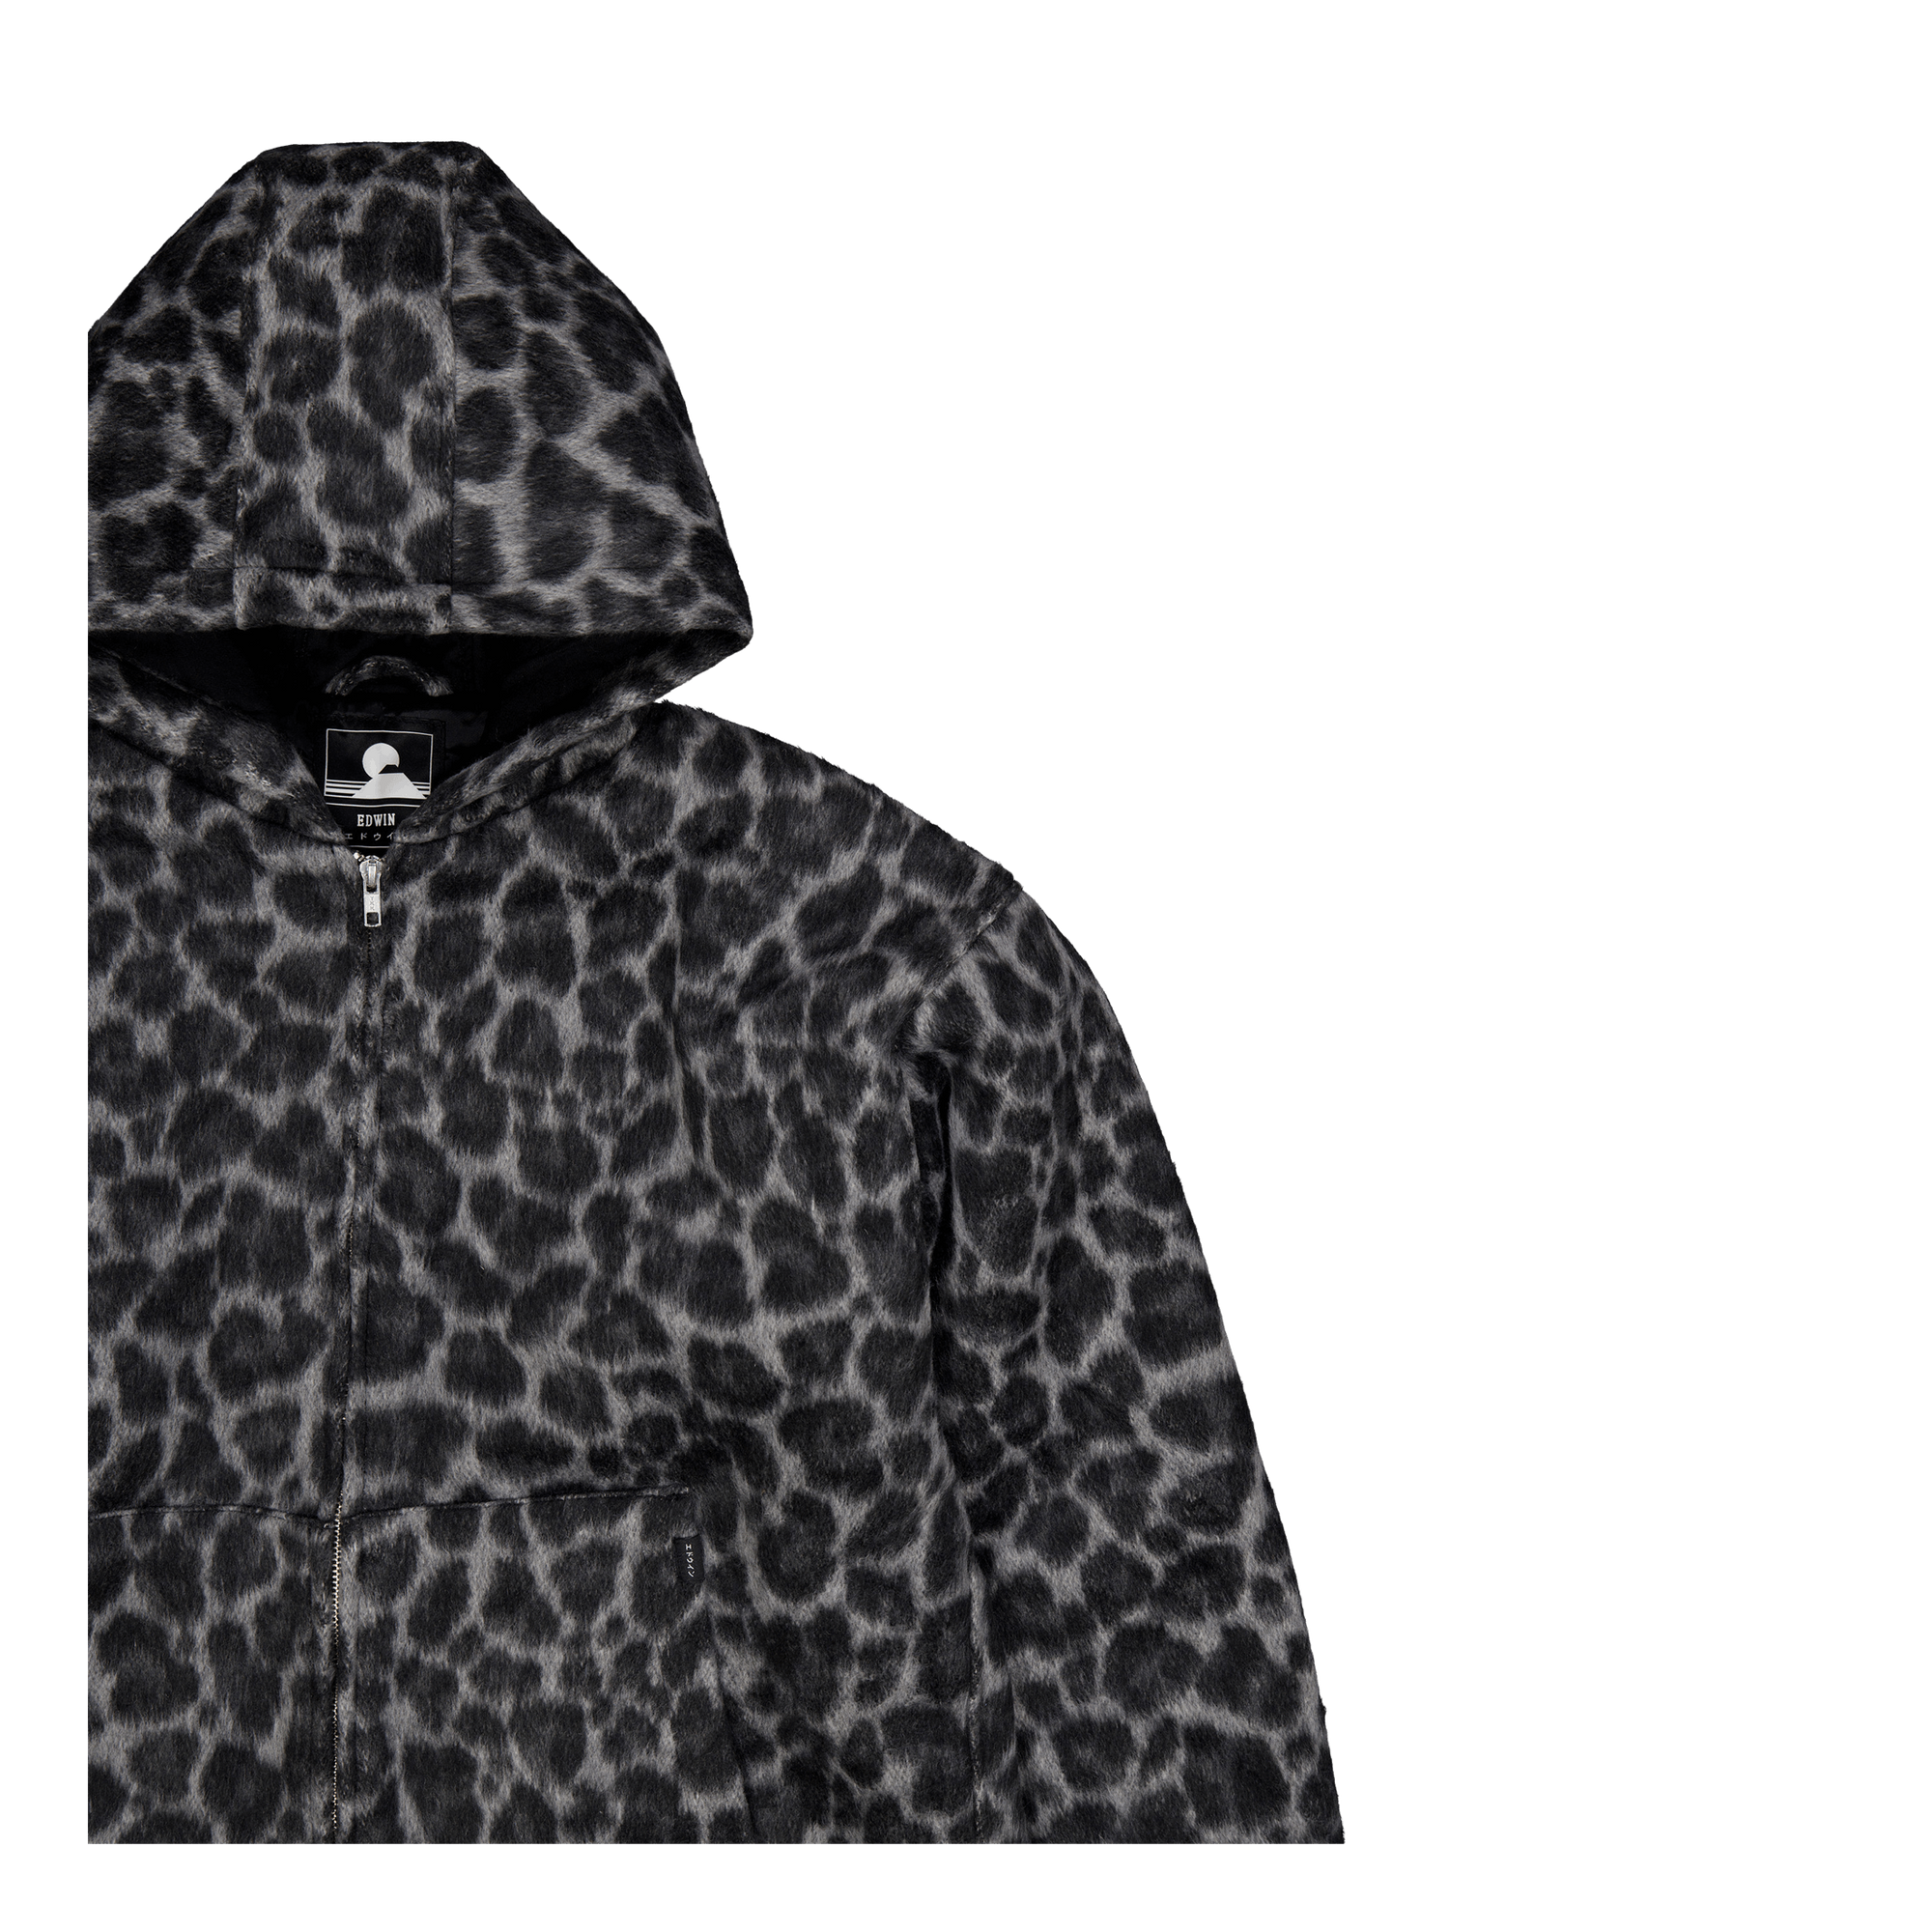 Daimon Hooded Jacket Lined Black / White Leopard